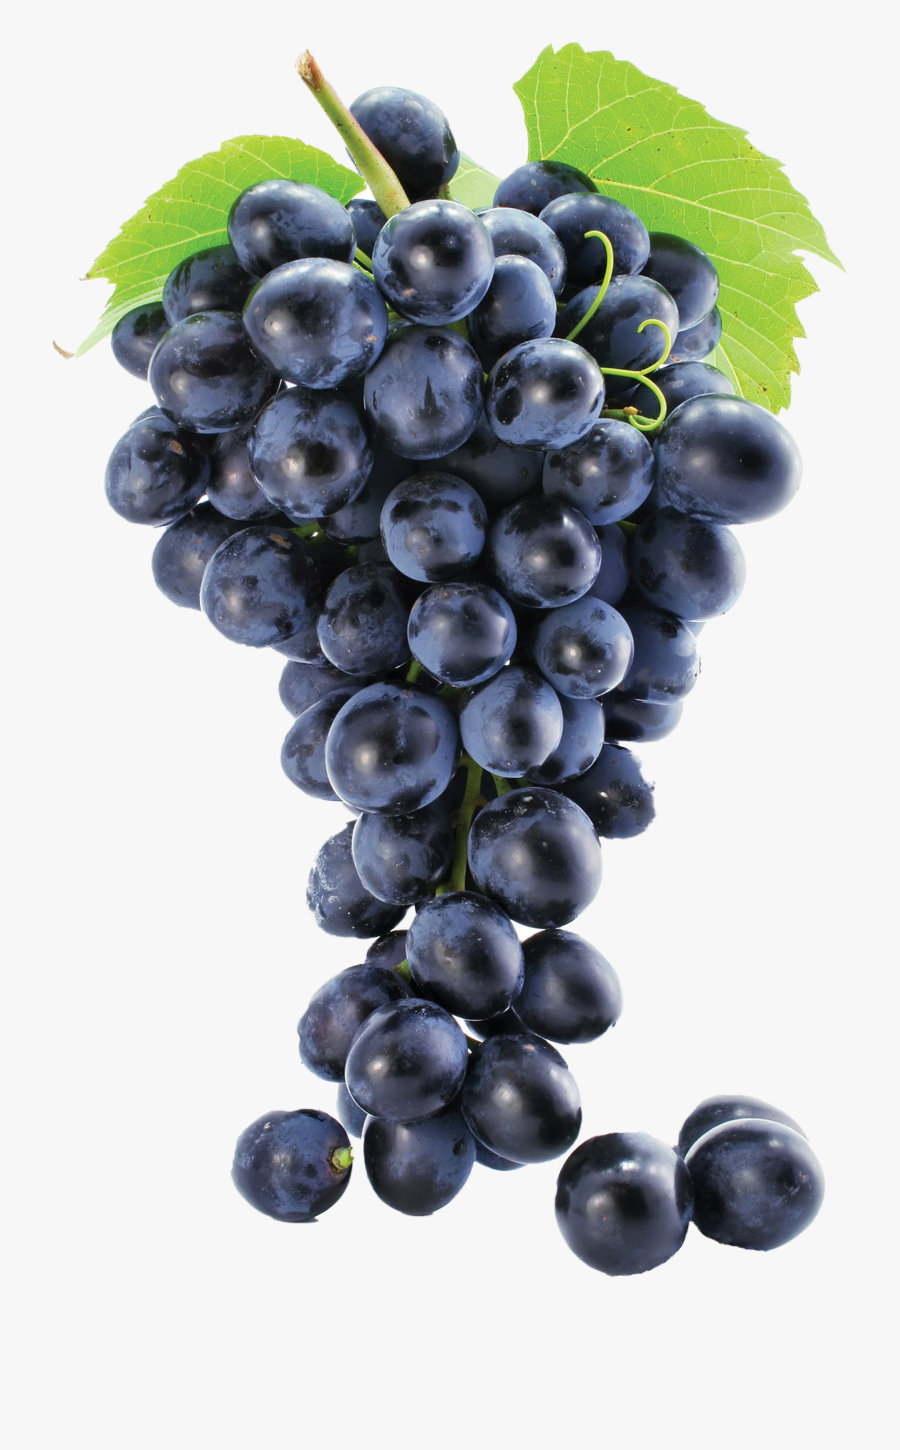 Grapes Collections At Sccpre - Grape Seed Grape Png, Transparent Clipart